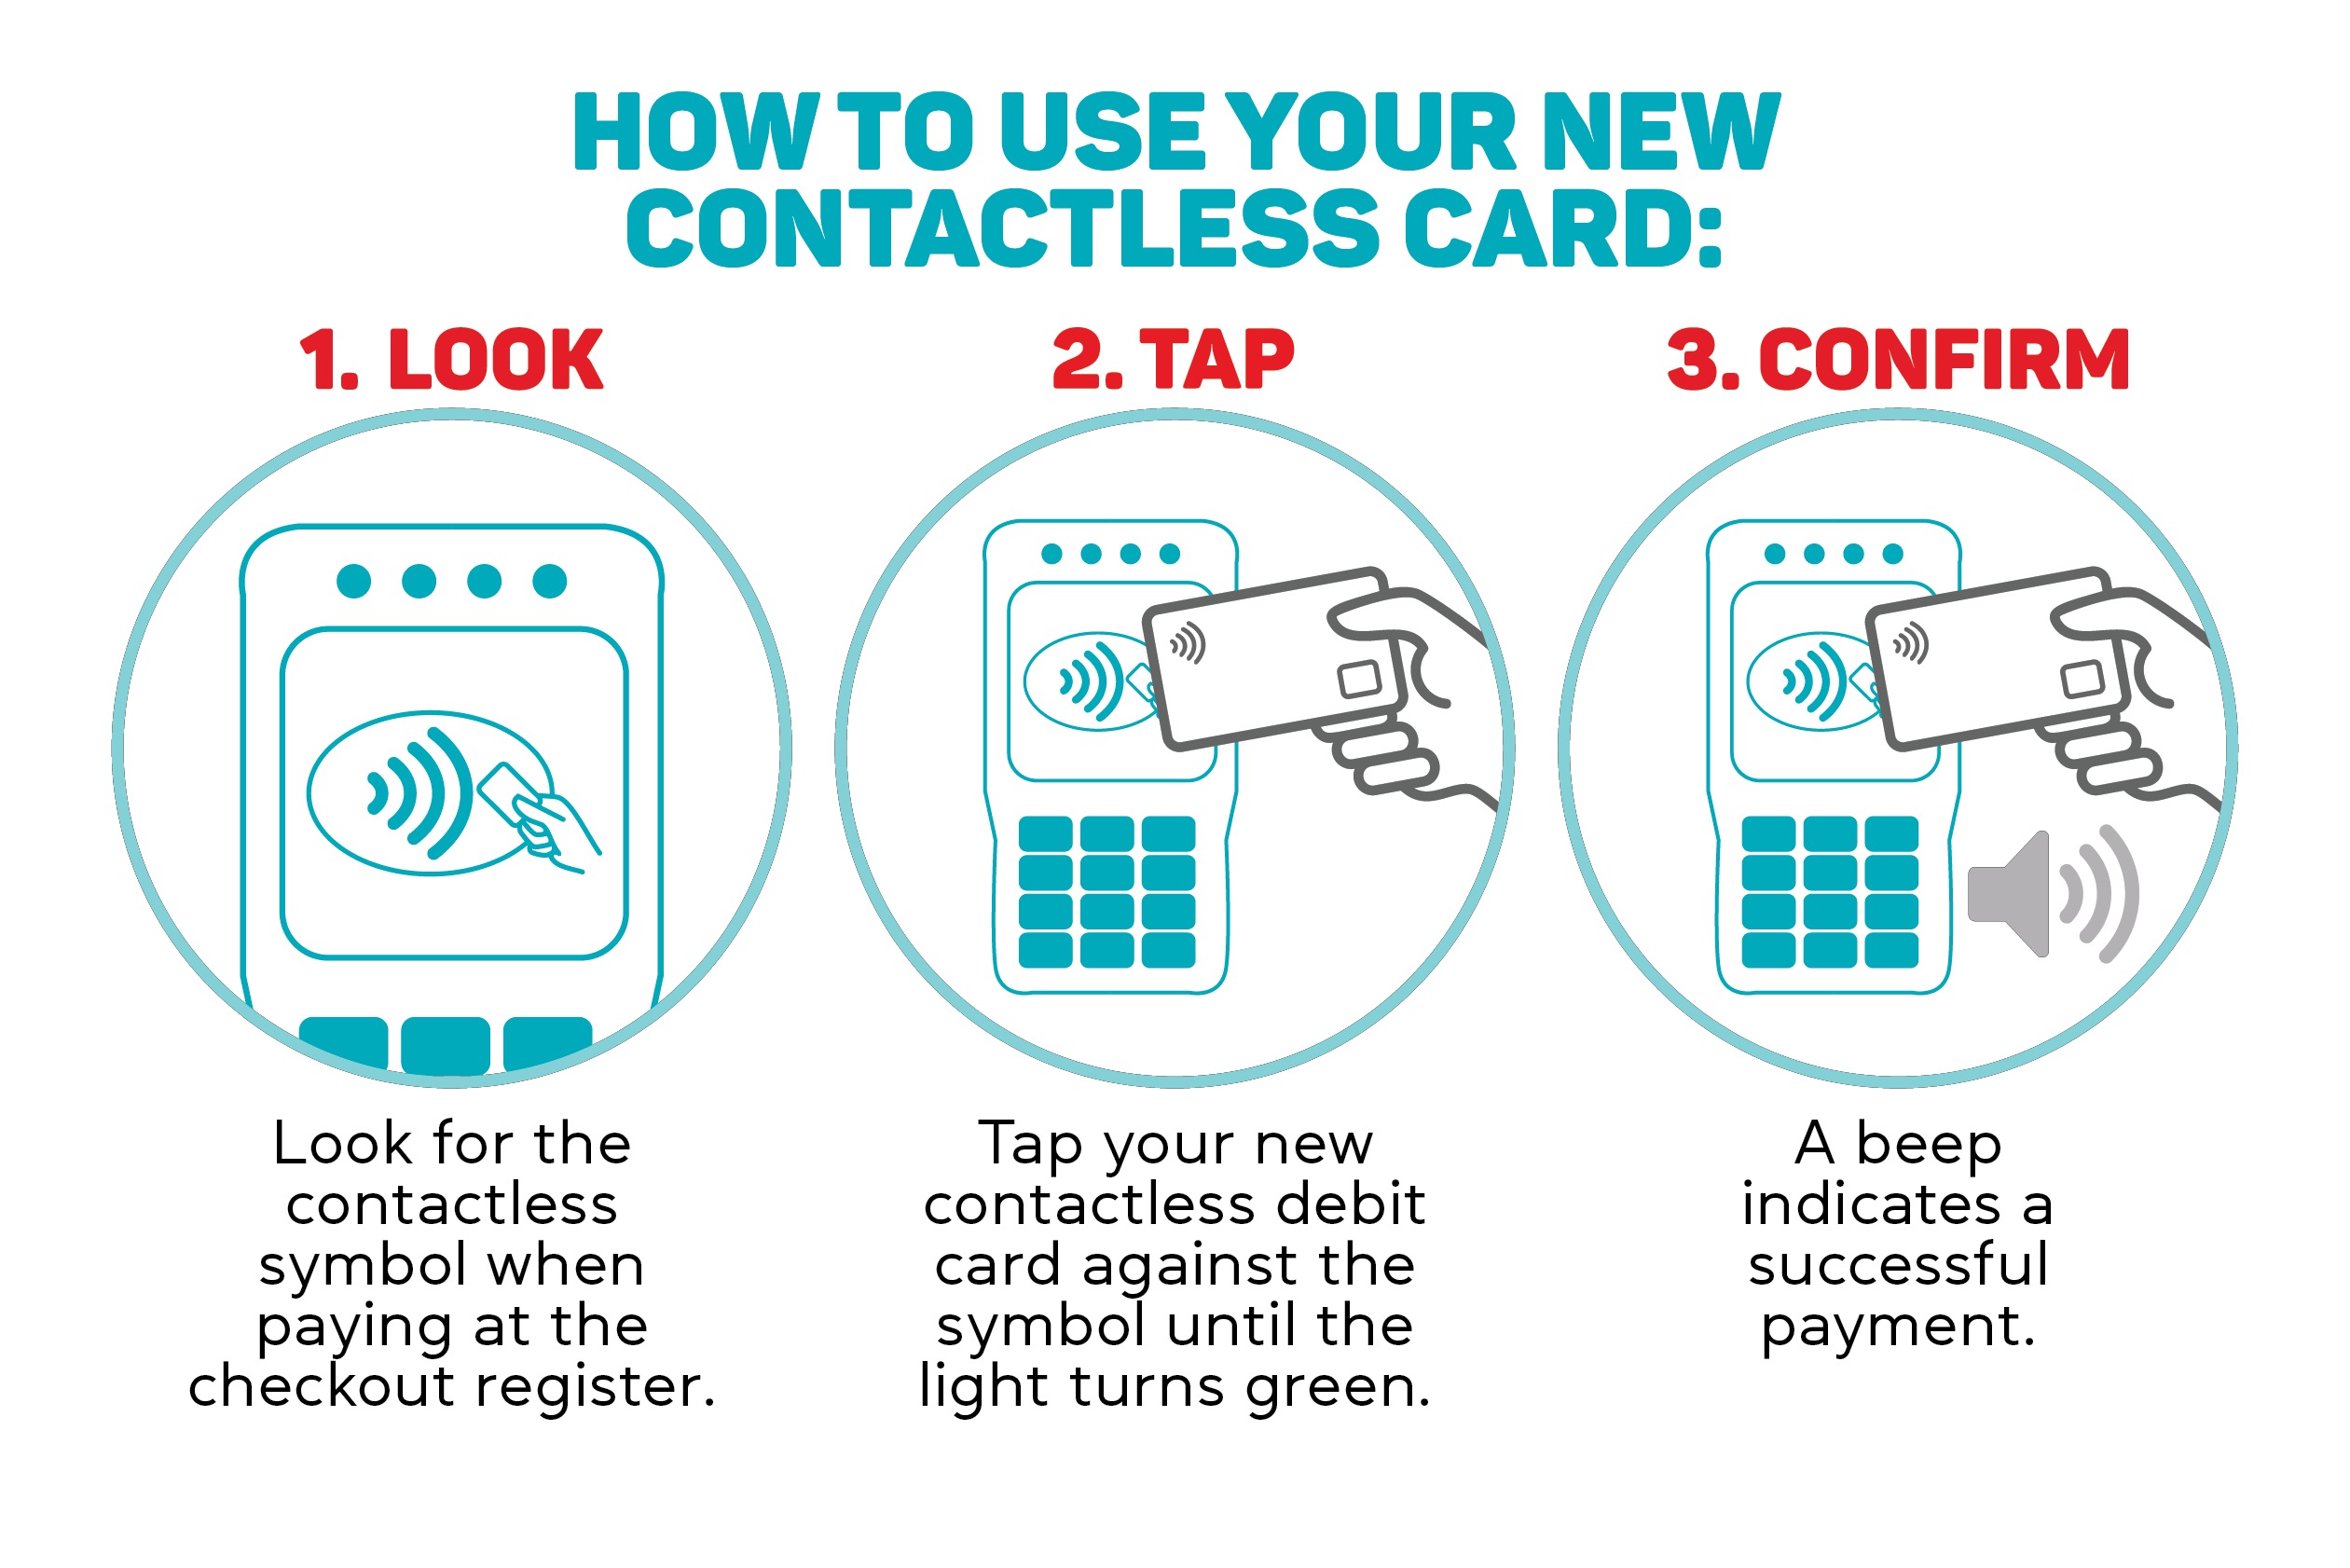 Look for the contactless symbol when paying at the checkout register. Tap your new contactless debit card against the symbol until the light turns green. A beep indicates a successful payment.